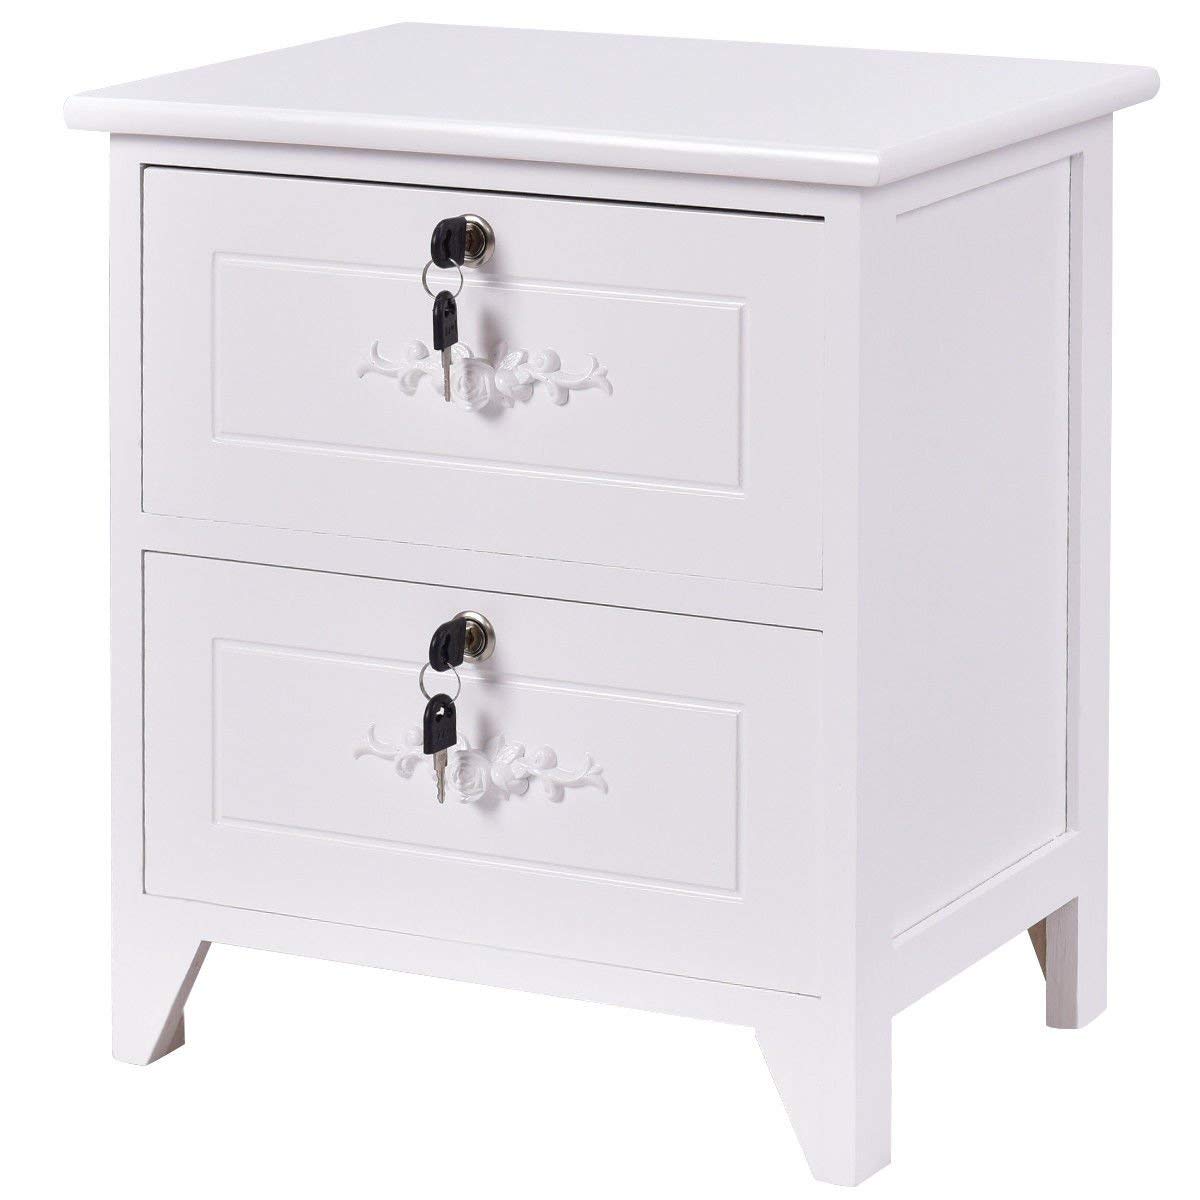 nightstand with locking drawer storage shelf elegant end table solid wood white kitchen dining antique marble top bedside tables tall skinny night broyhill illuminated cabinet